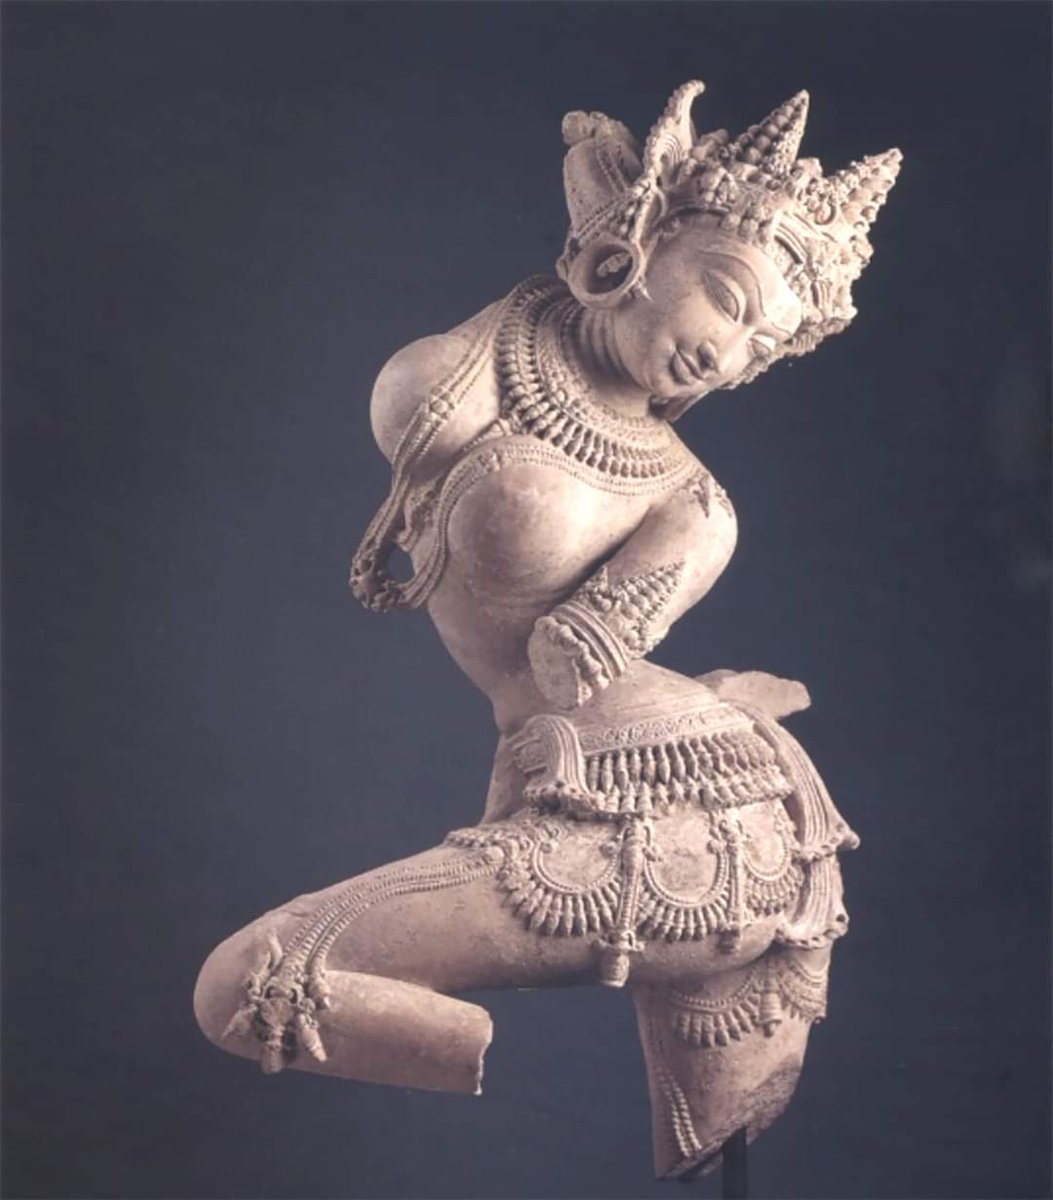 A 11th Century CE; Terracotta Celestial Dancer (Apsara), from Madhya Pradesh, India.

The Hindu temple is conceived as a heavenly abode for the presiding deity. The building's stepped, indented, and towering exterior evokes the mountains of Indra's heavens, home to the assembly…